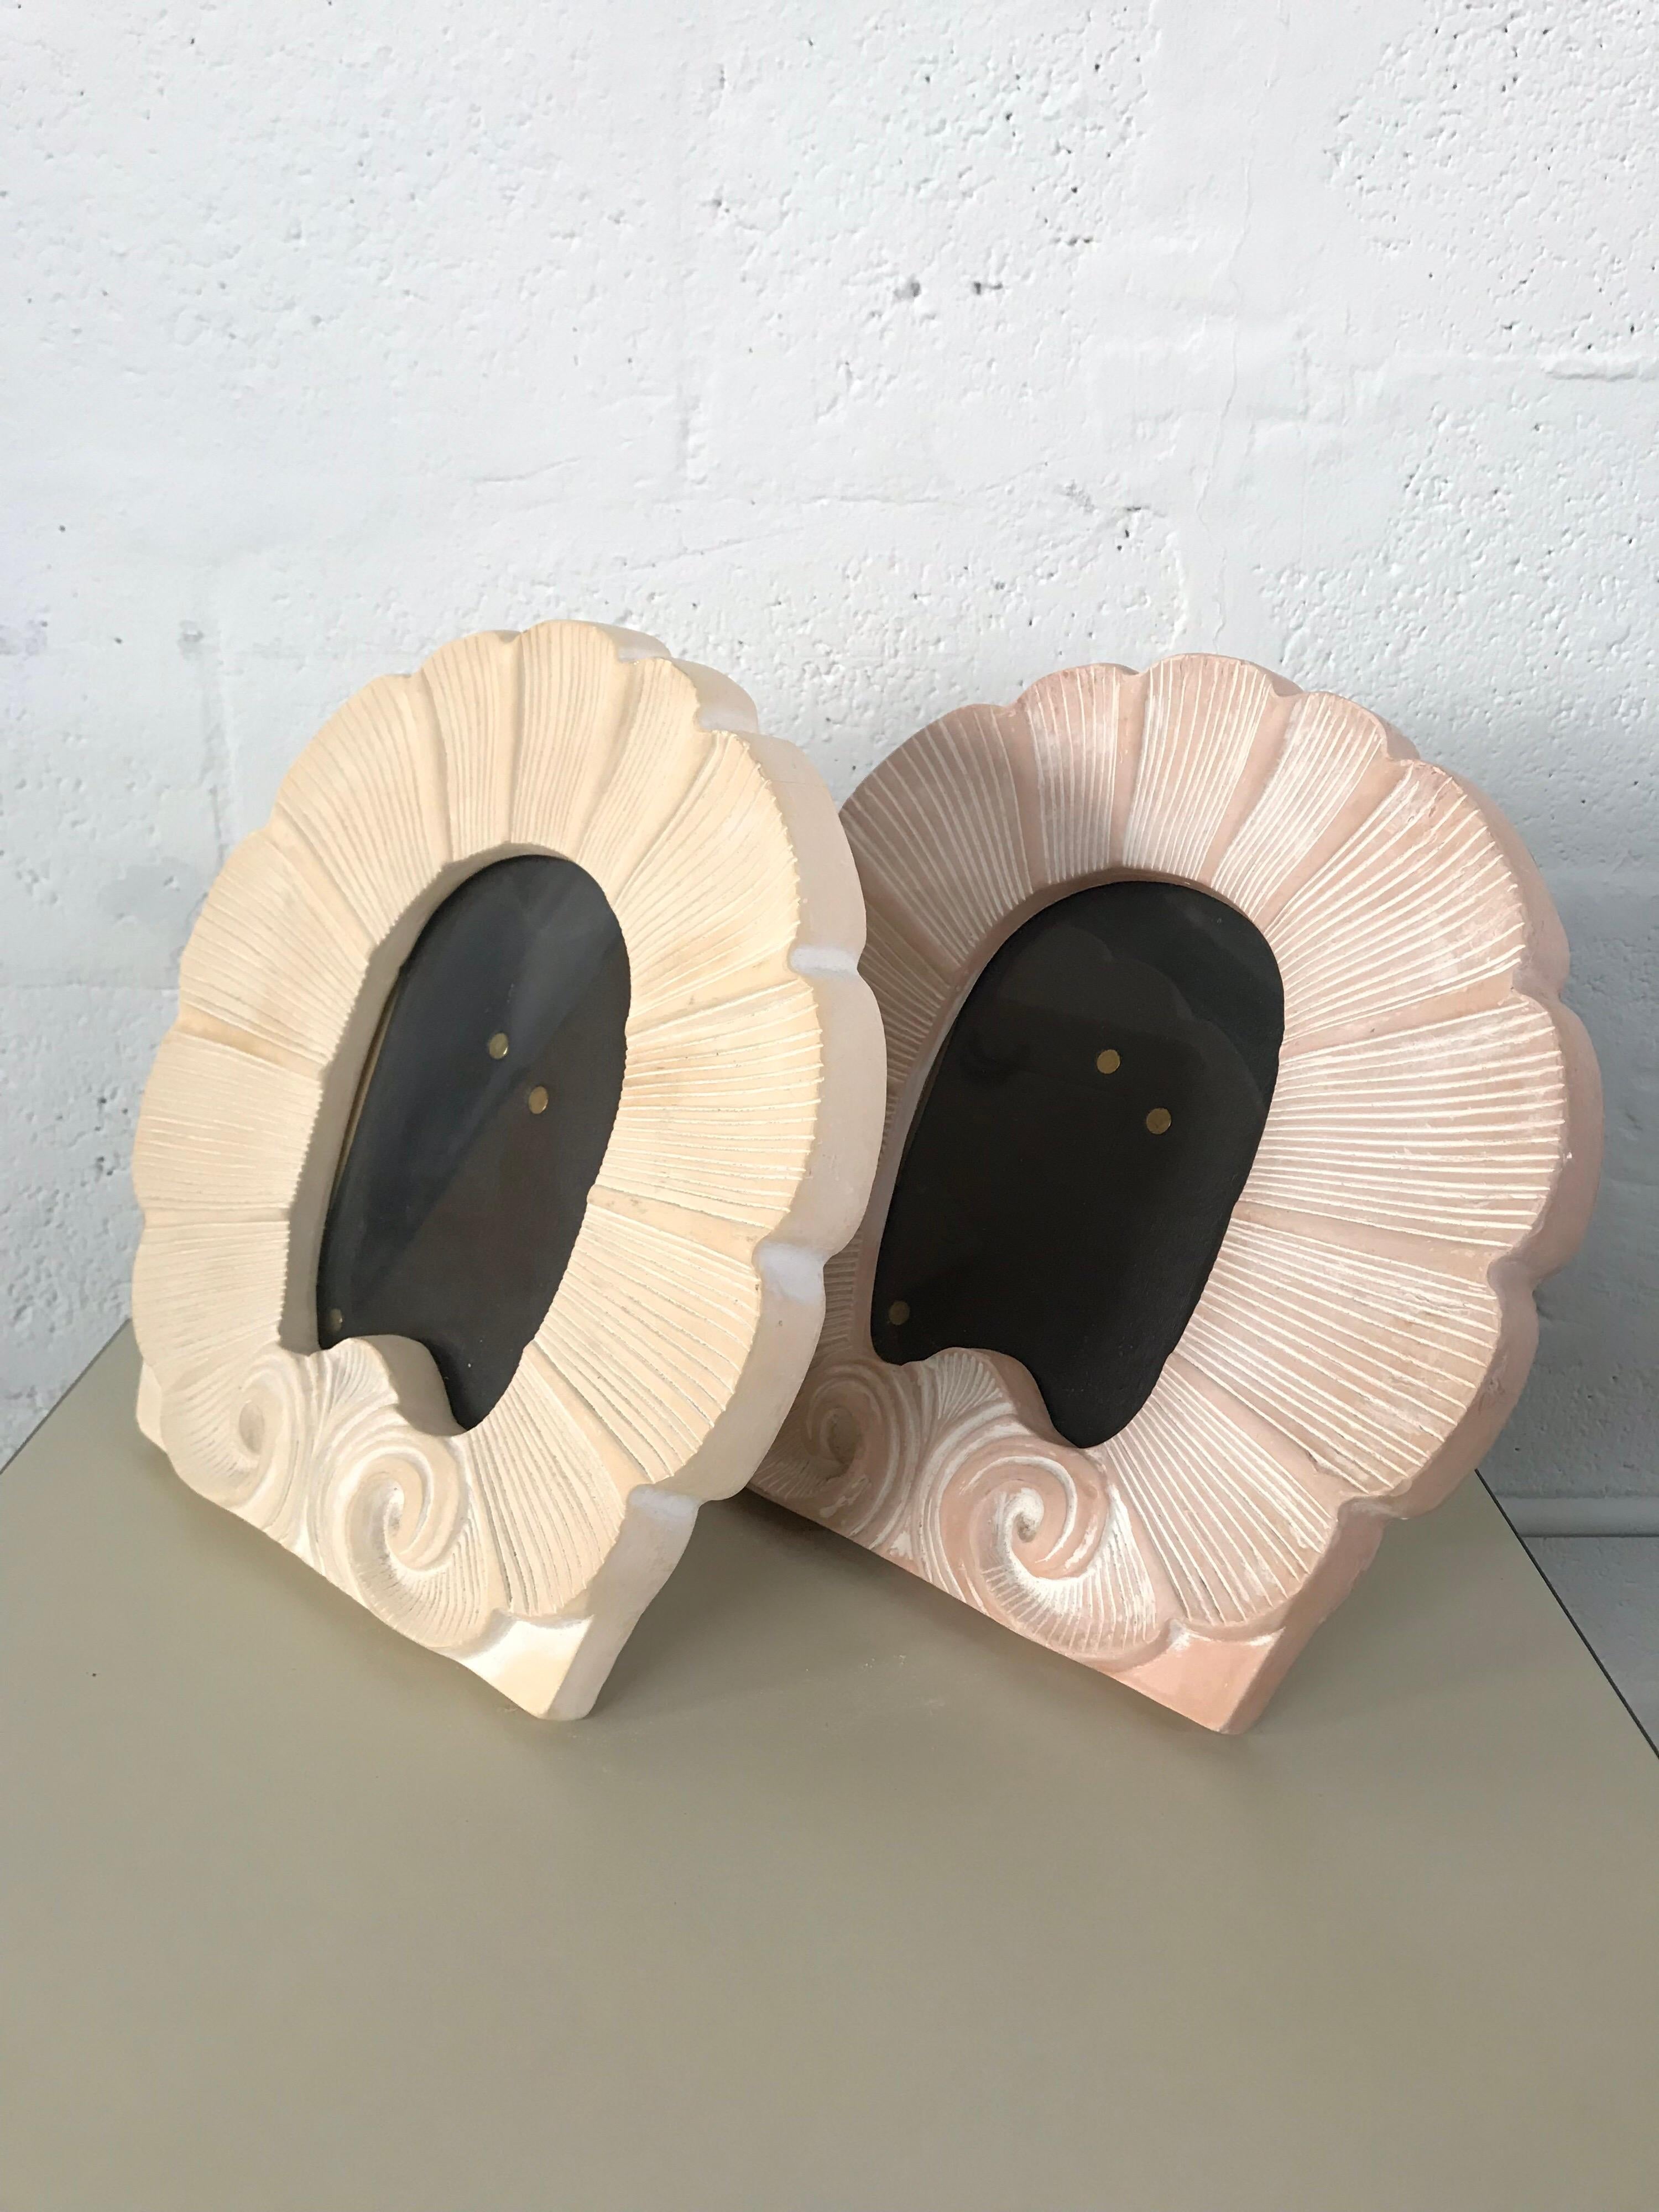 Shell motif photo or picture frame rendered in terra cotta ceramic, in either pink or buff finish.